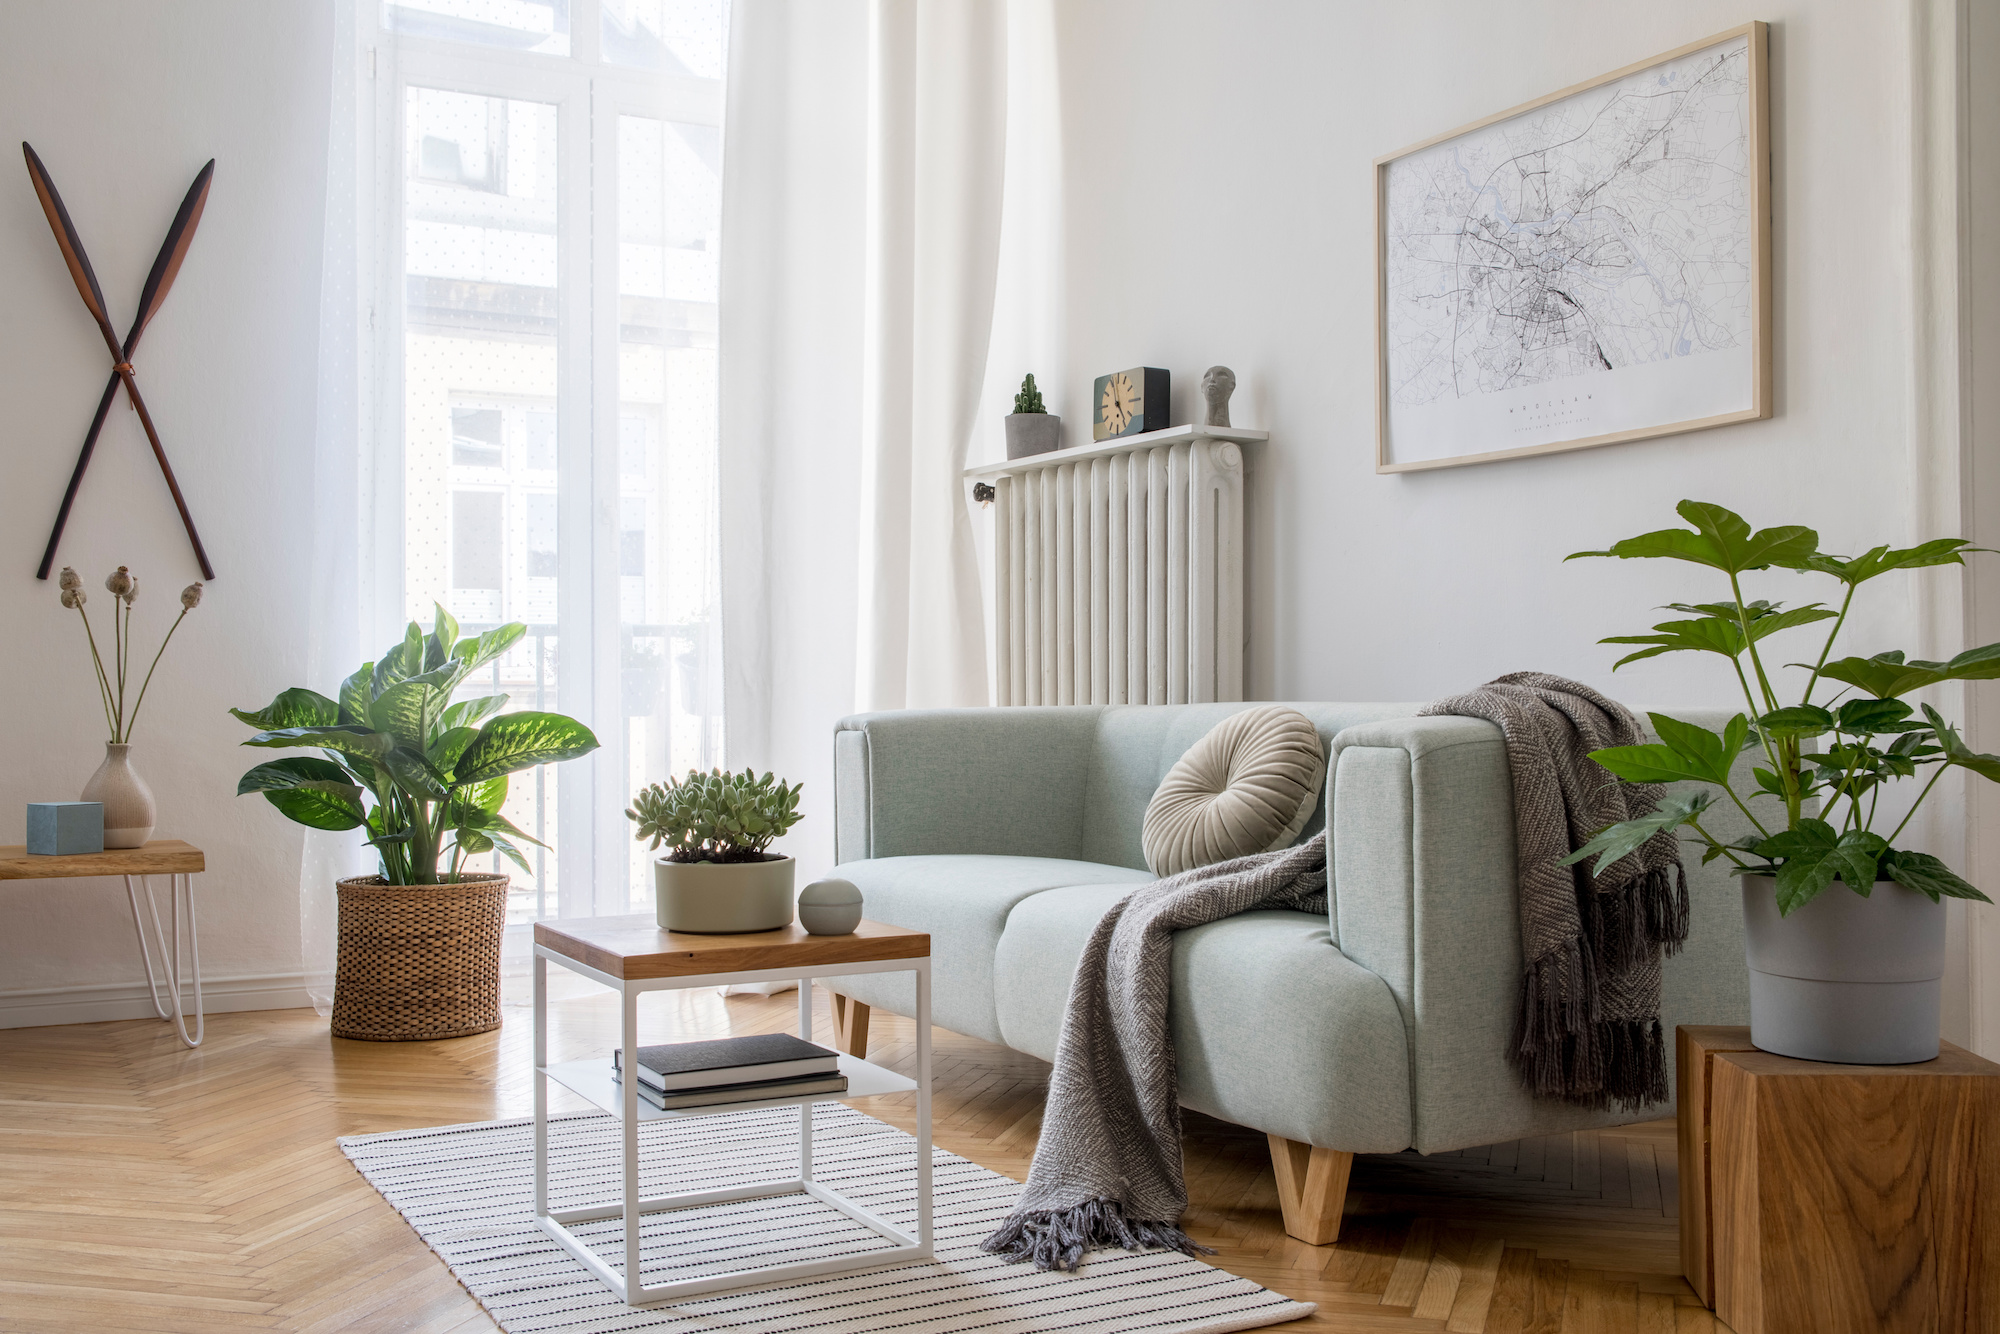 Apartment Essentials: 40 Things to Make Your Apartment Feel Like Home